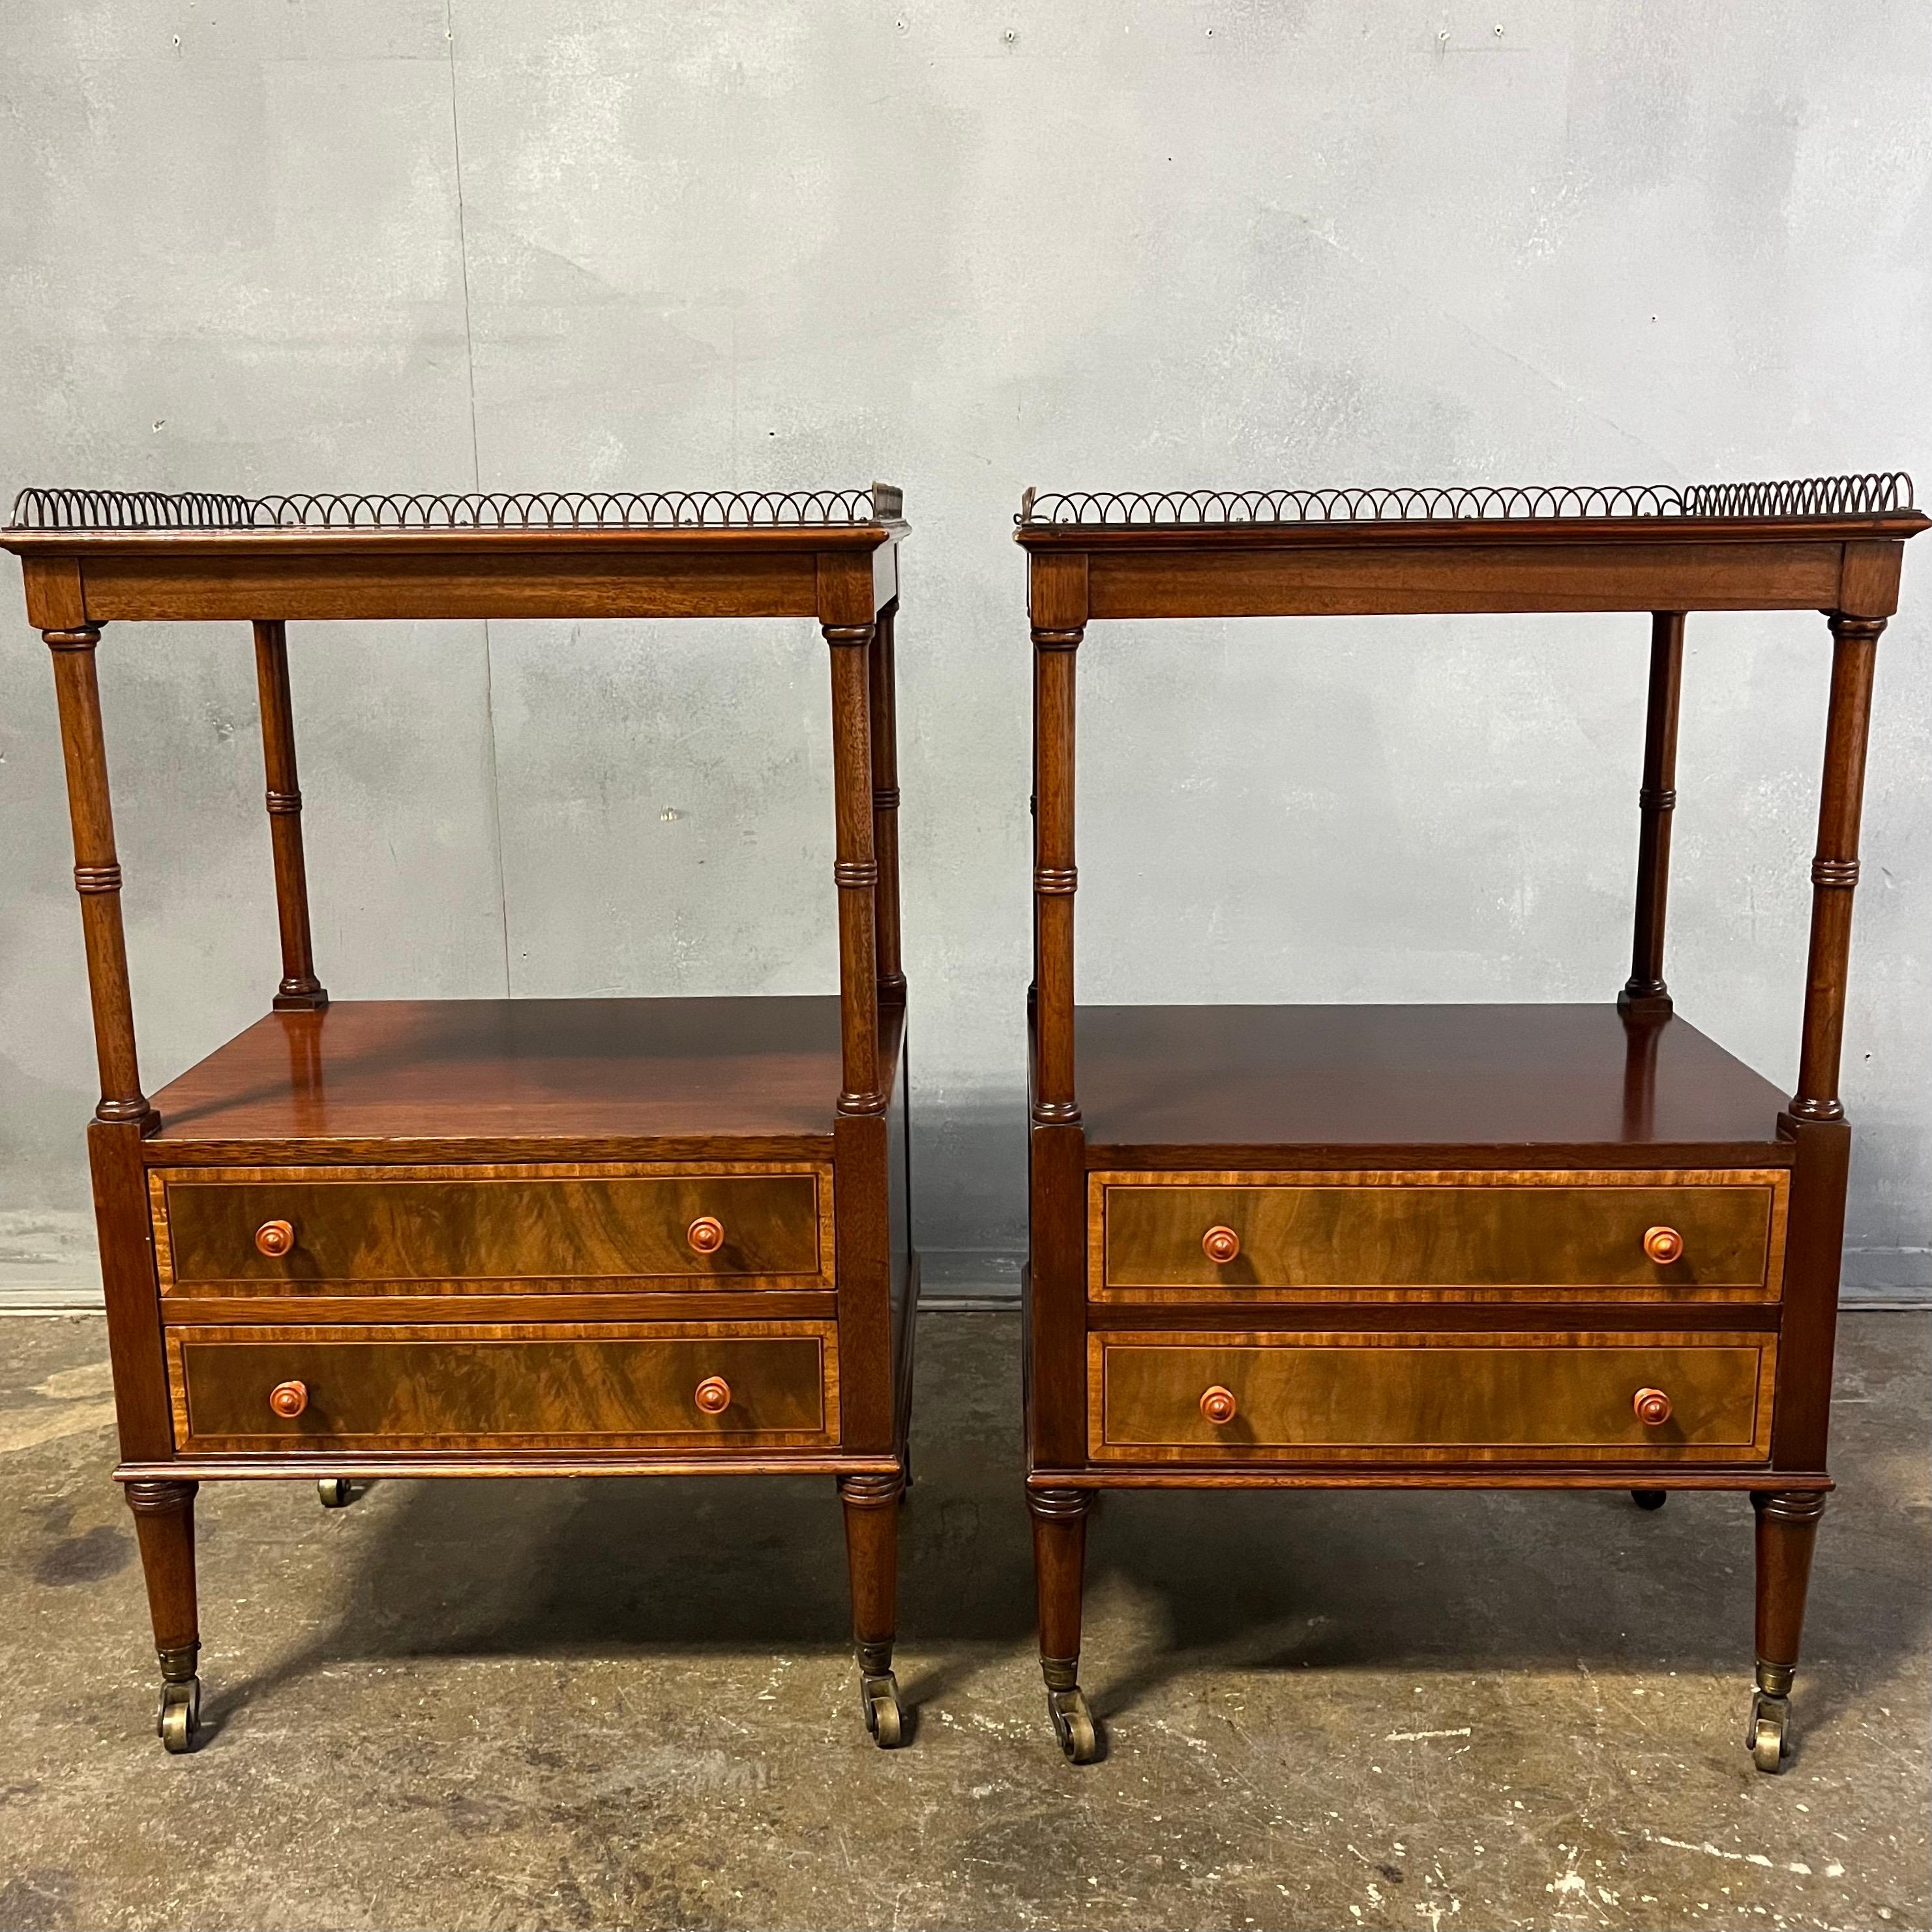 Gorgeous pair of bedside or end tables having a mahogany construction with olive burl wood inlay and a brass fence gallery. Featuring two drawers with open hole measuring a 10.5' height opening above drawers all standing on brass casters. We just